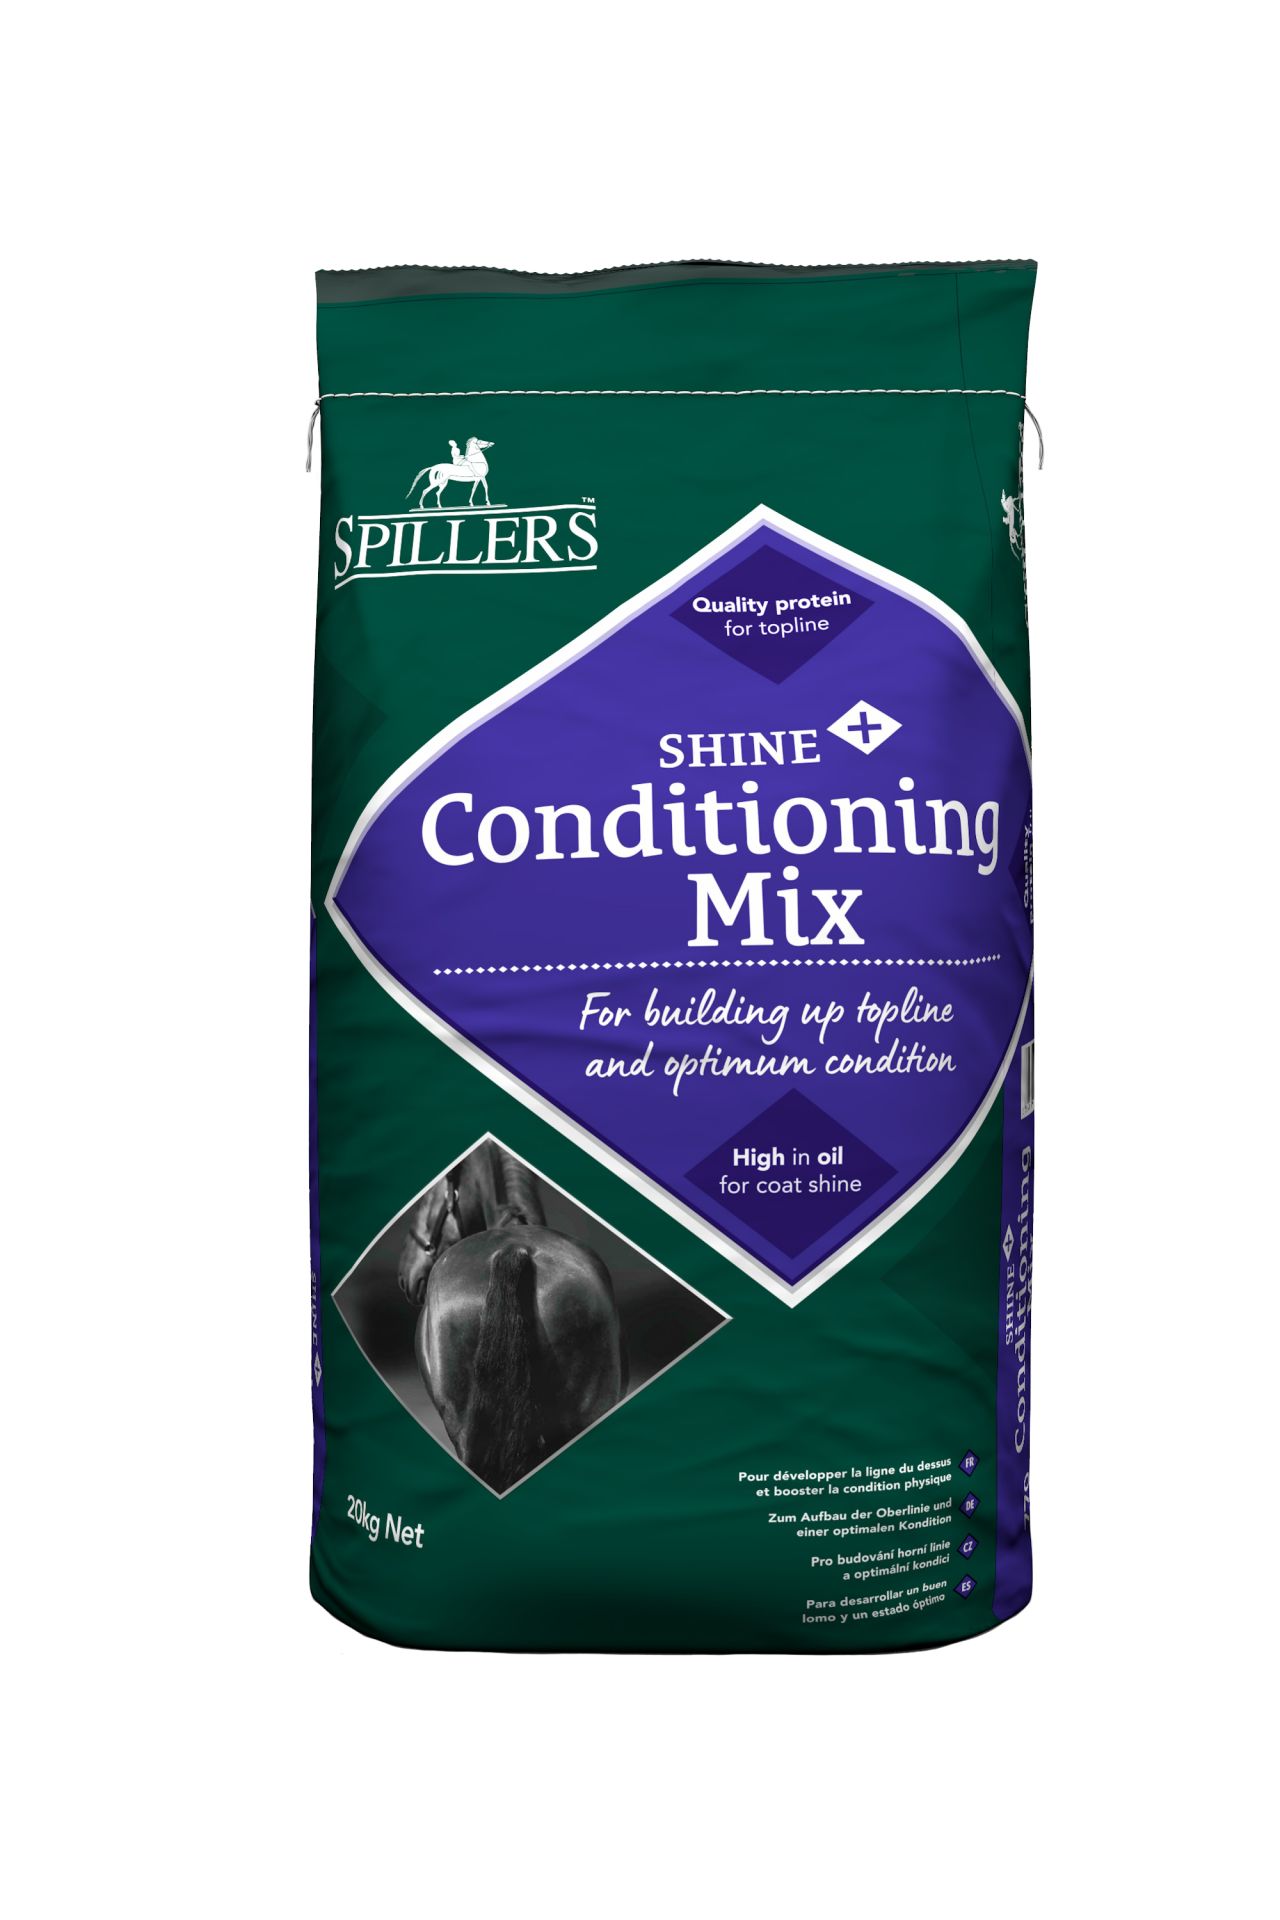 Shine + Conditioning Mix - Spillers - 20 Kg